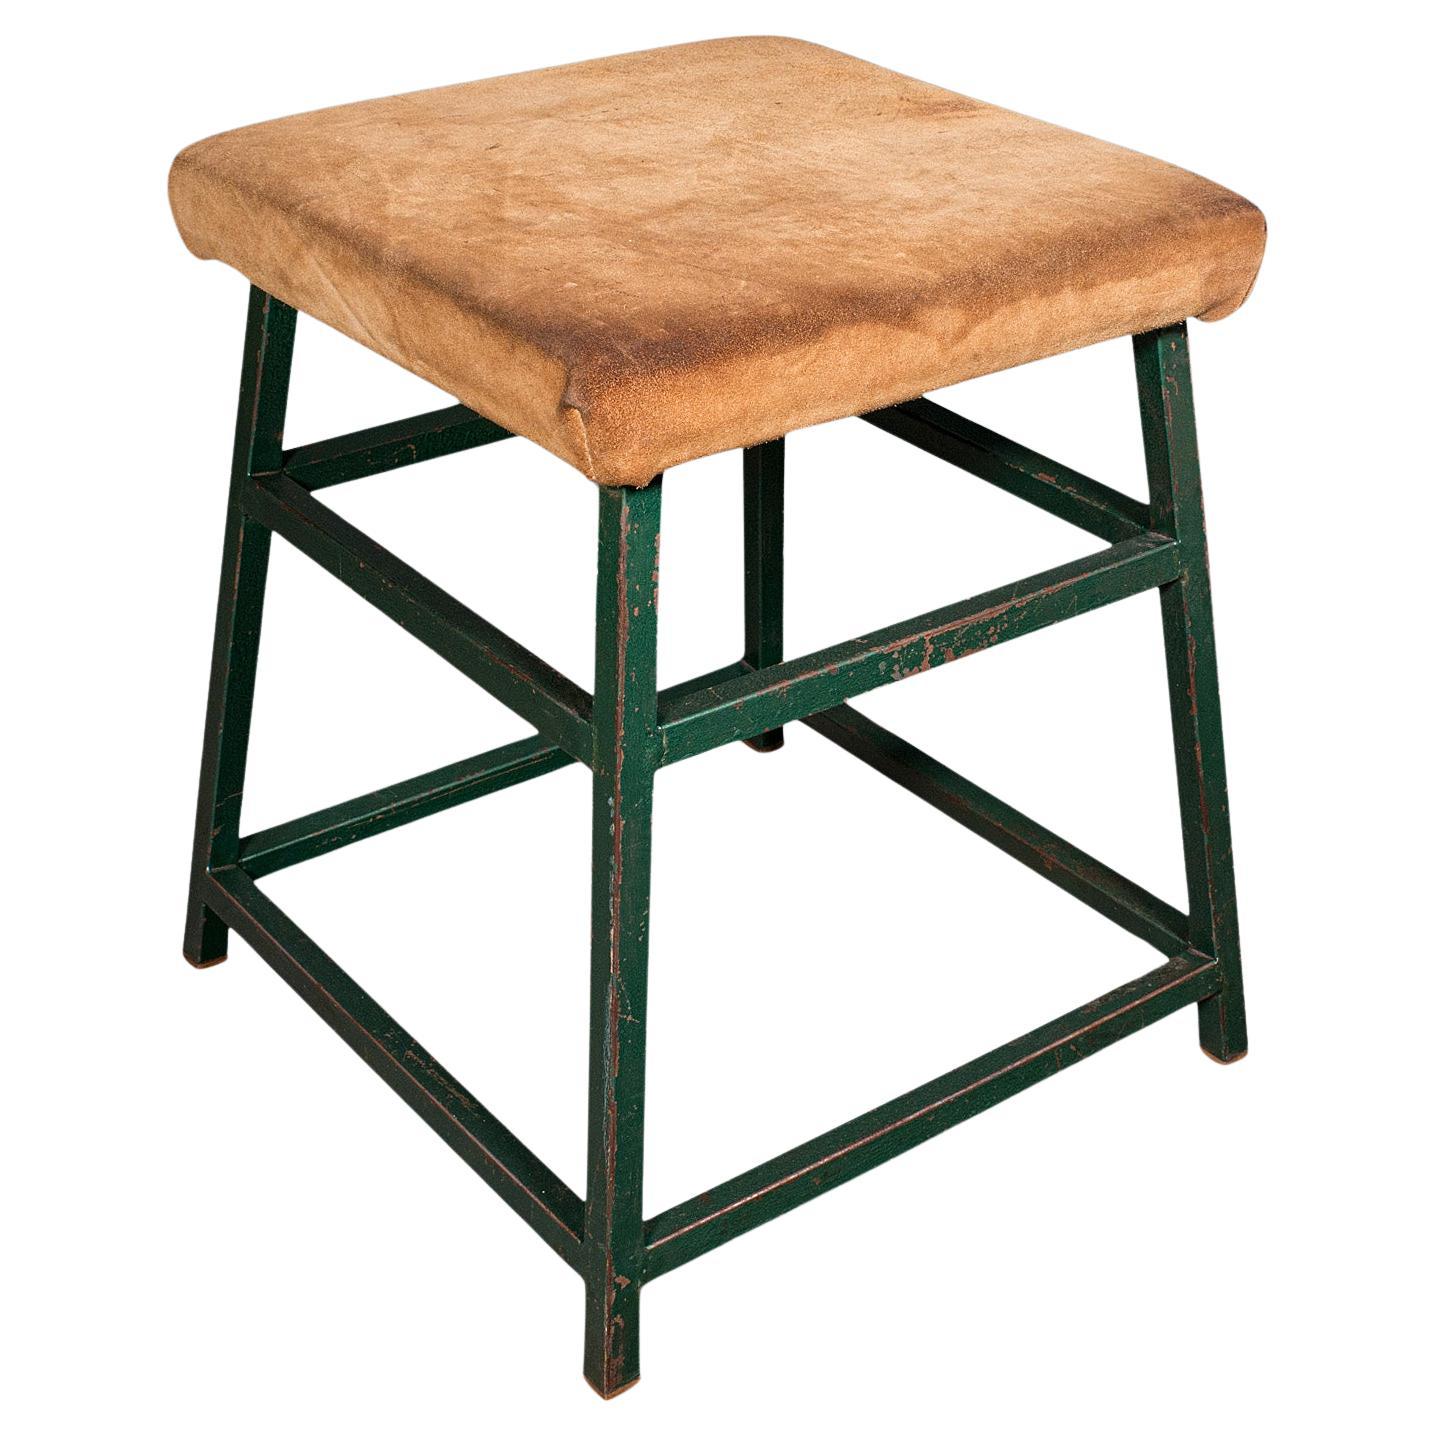 Large Vintage Industrial Lab Stool, English, Suede, Kitchen, Office Seat, C.1950 For Sale